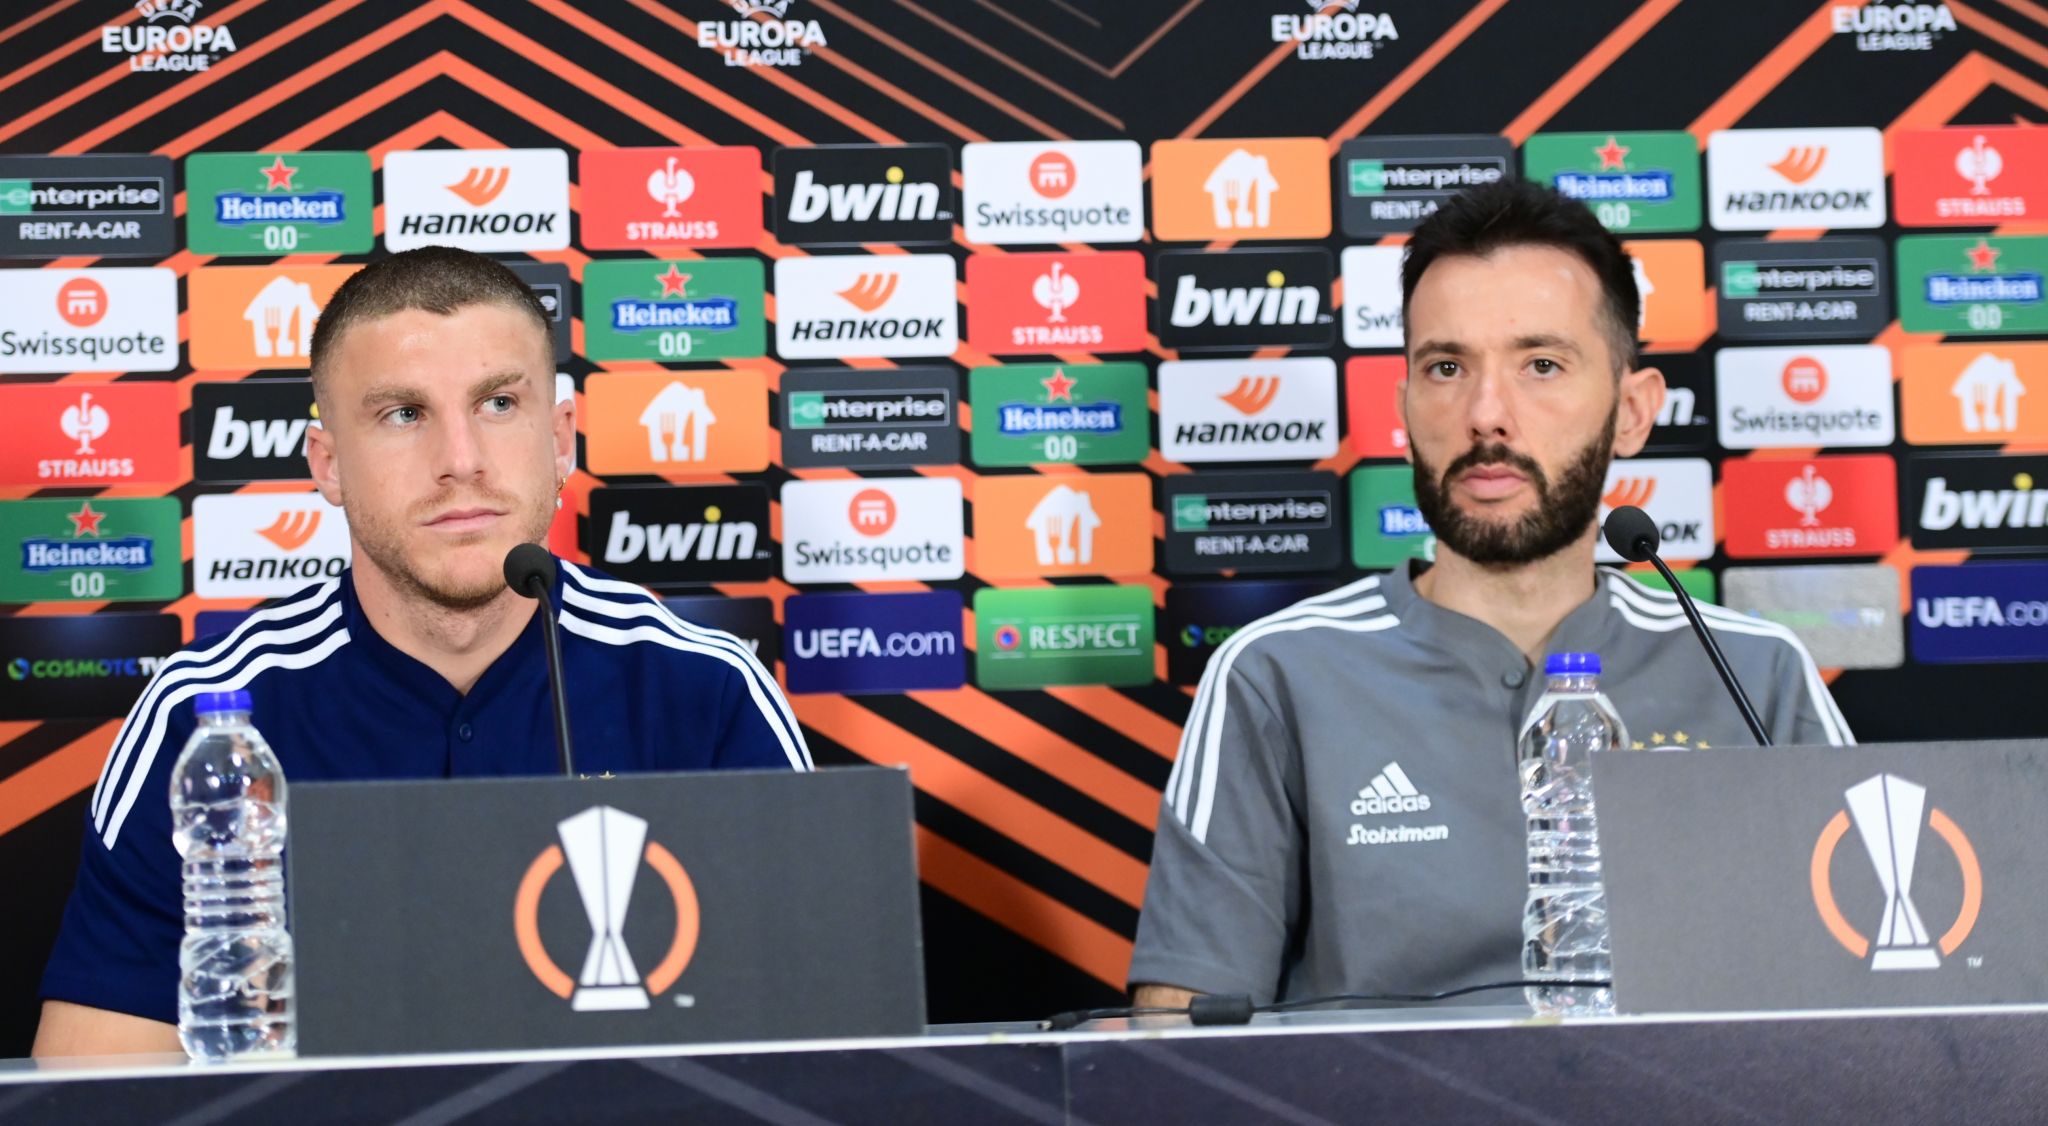 The press conference for the match against Freiburg